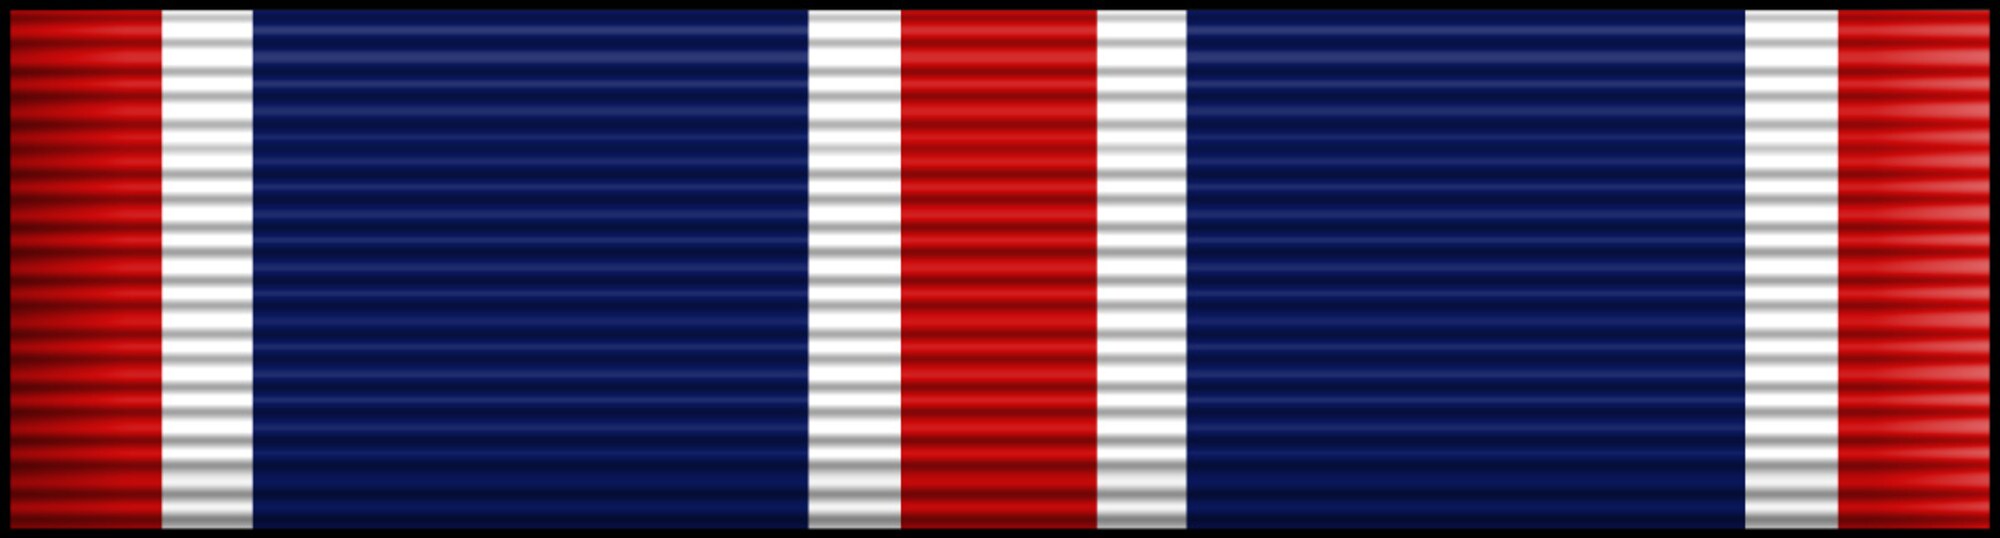 Air Force Outstanding Unit Award is awarded by the secretary of the Air Force to numbered units that have distinguished themselves by exceptionally meritorious service or outstanding achievement that clearly sets the unit above and apart from similar units. (Air Force courtesy photo)